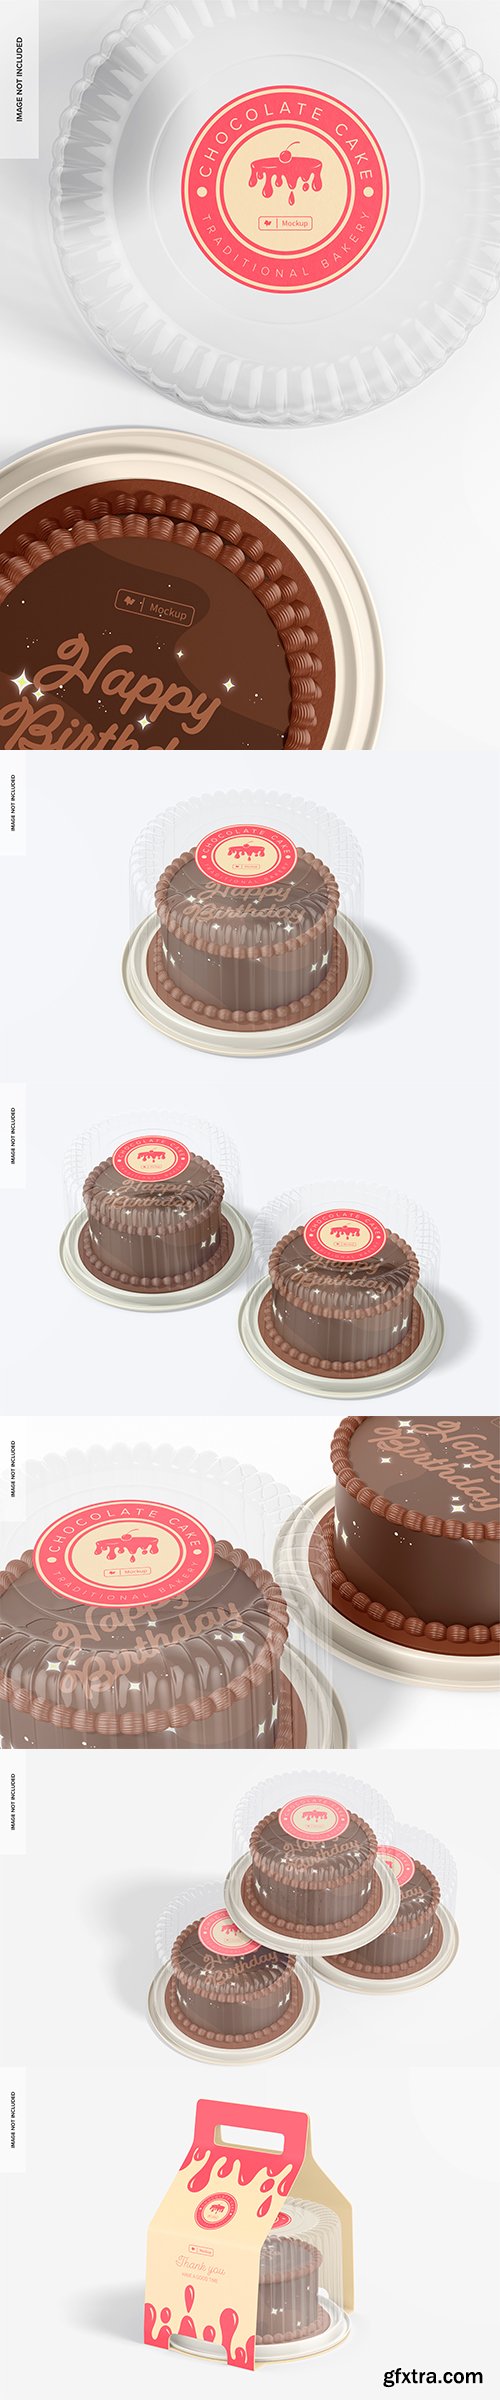 Plastic round cake containers mockup